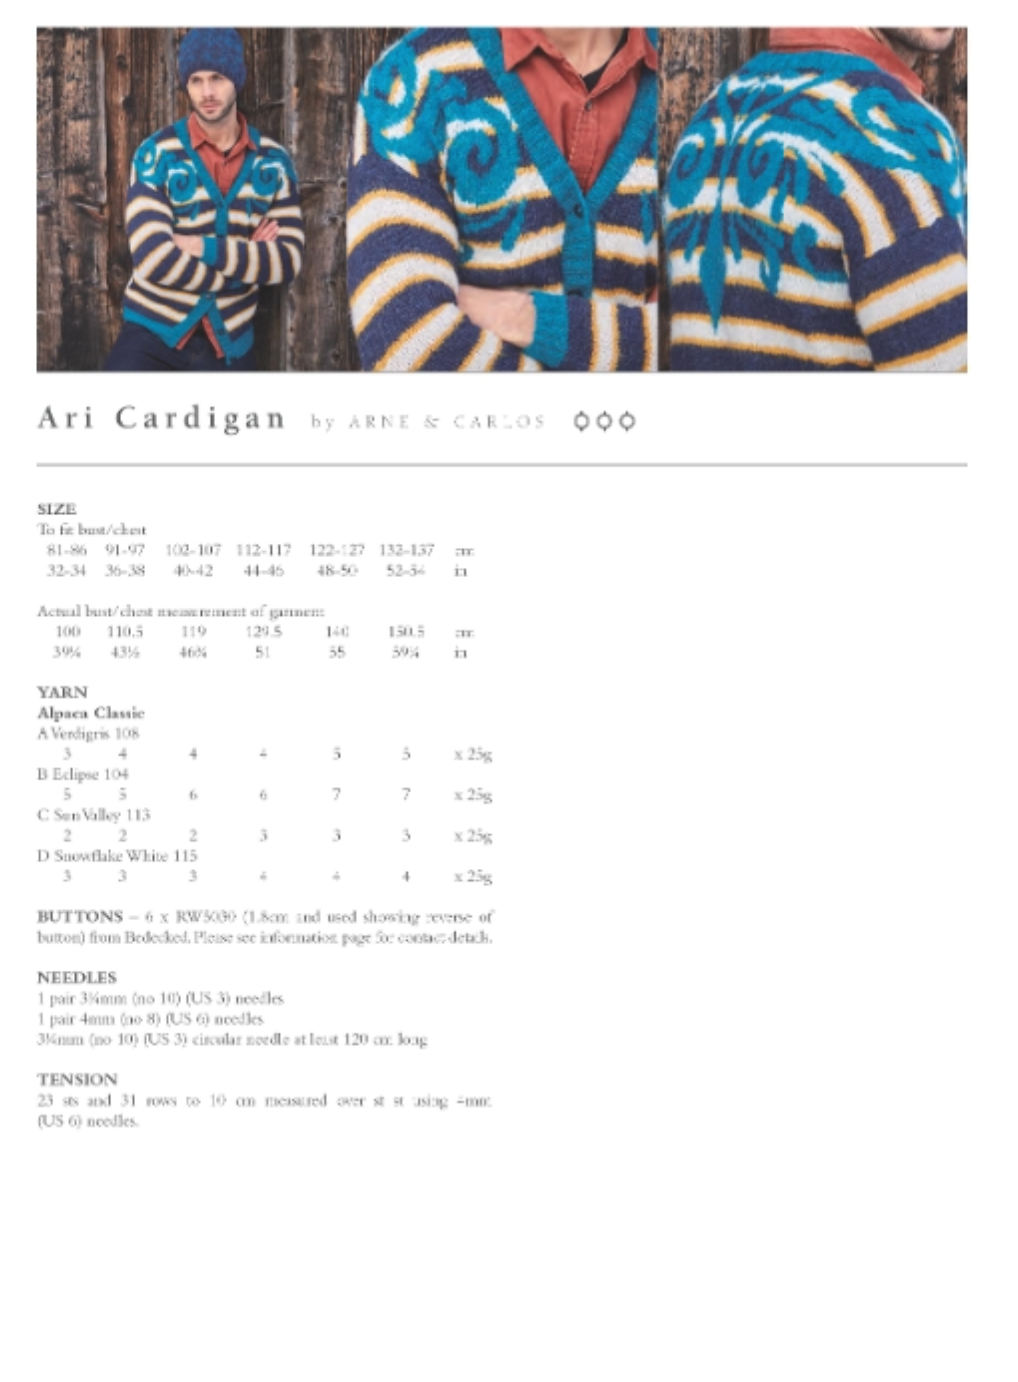 Ari cardigan. A cardigan with white and navy blue stripes with thin yellow lines. Over top, a teal blue nordic swirl pattern over the chest and back. A blue teal trim is on the cuffs and collar of the cardigan.  